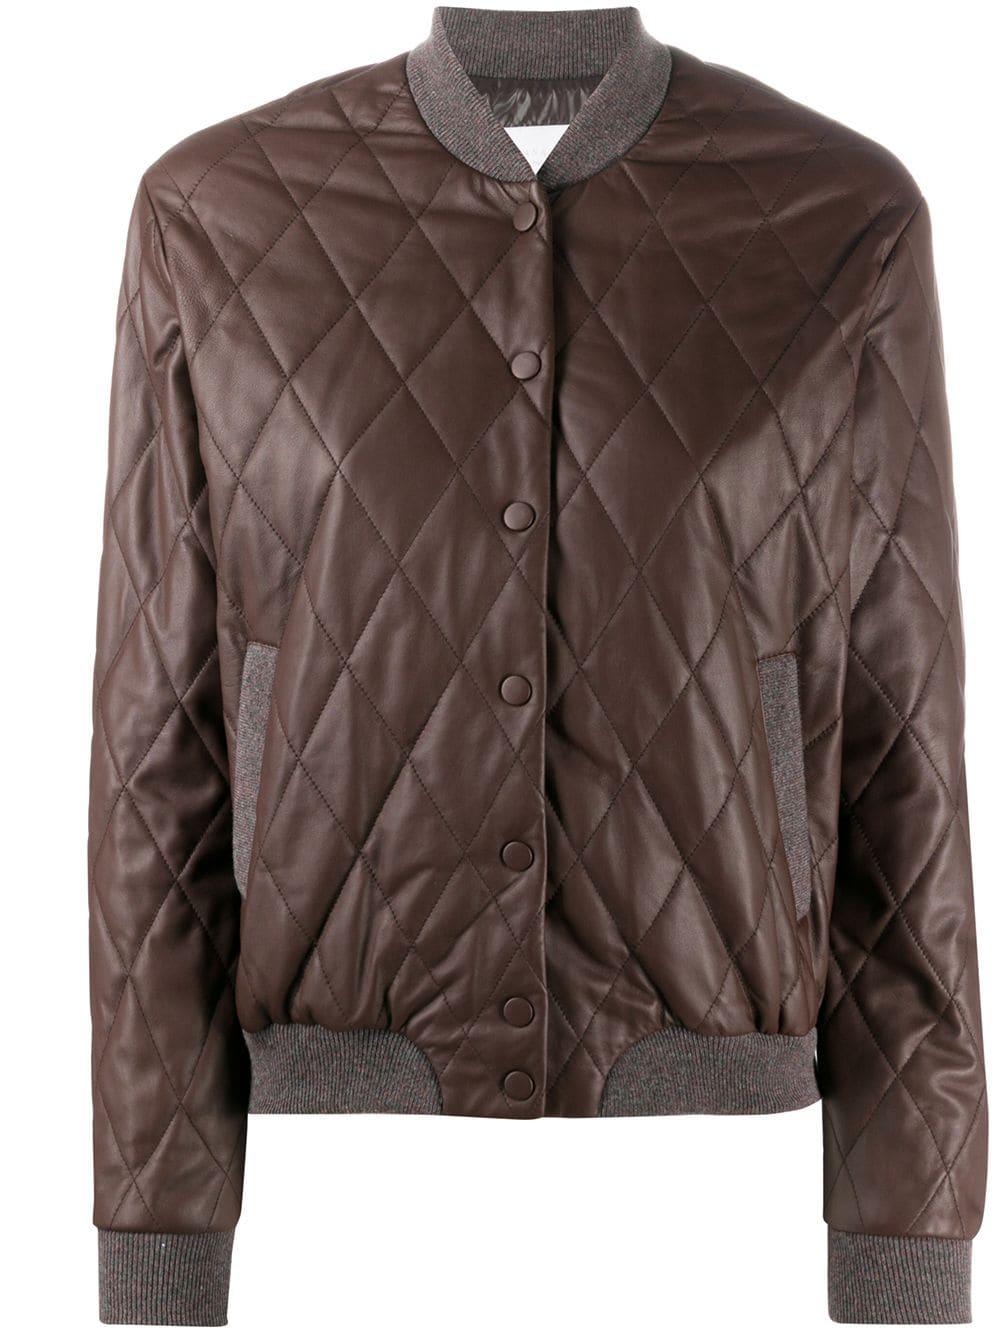 Fabiana Filippi Silk Quilted Bomber Jacket in Brown - Lyst